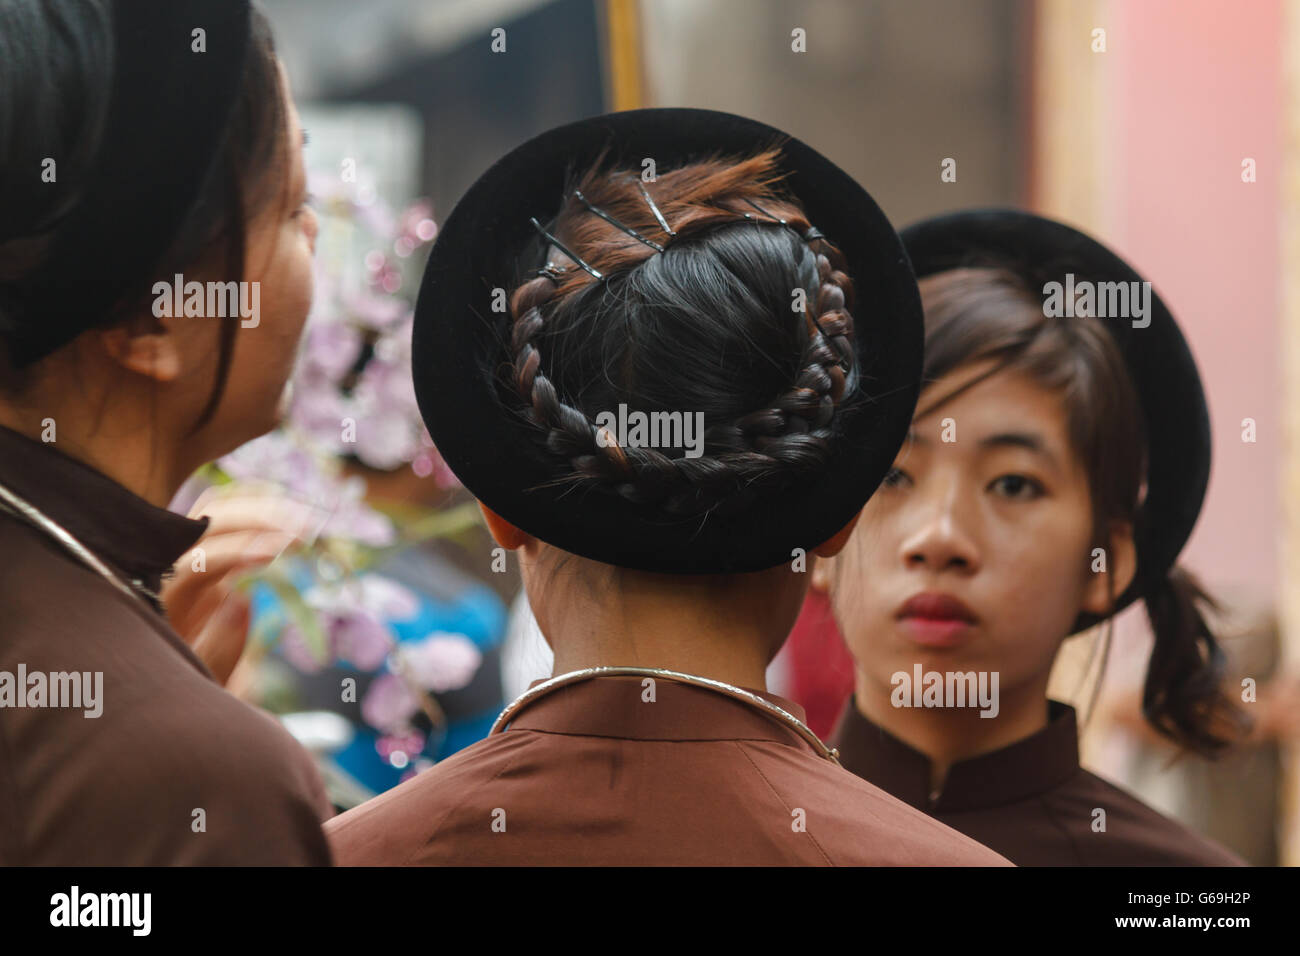 Woman in Ao Dai prepares girls for religious ceremony in Central Vietnam Stock Photo